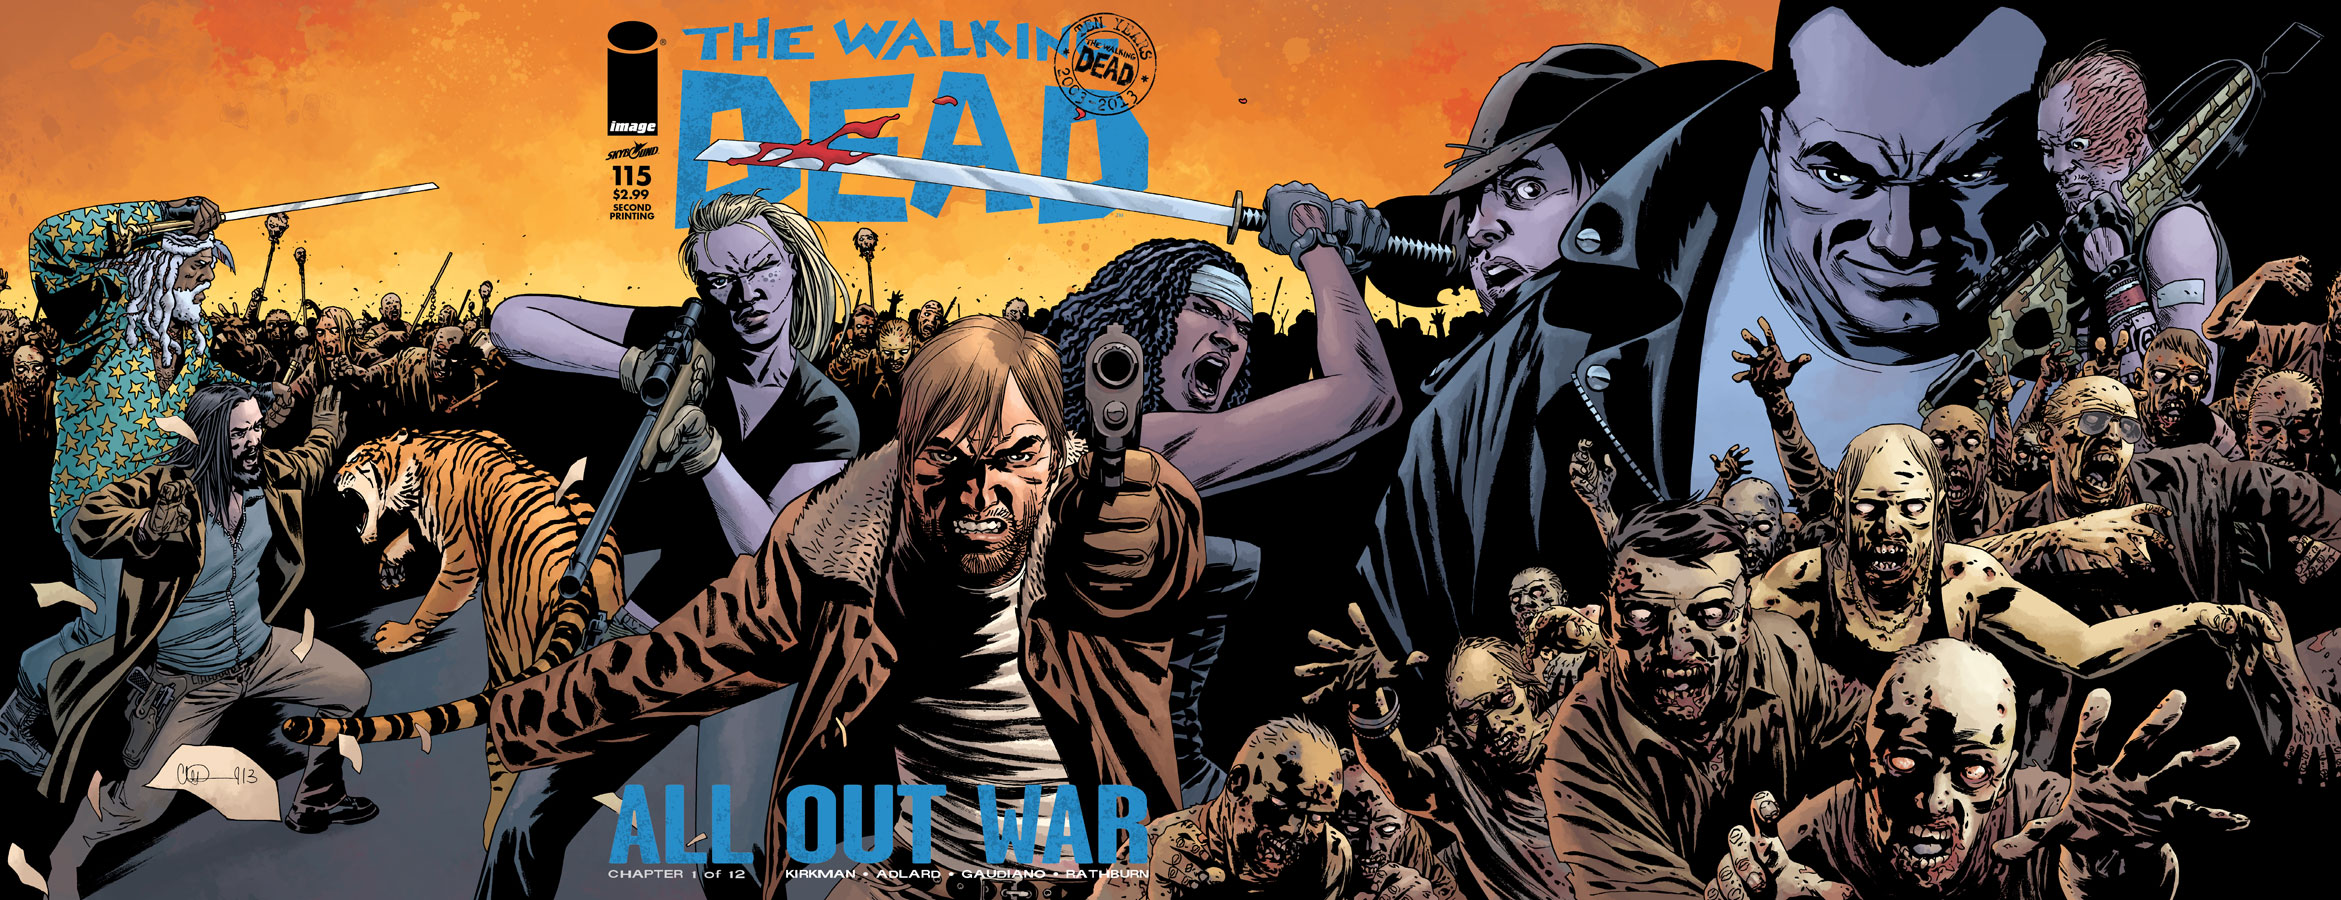 The Walking Dead - Comic Books To Video Games